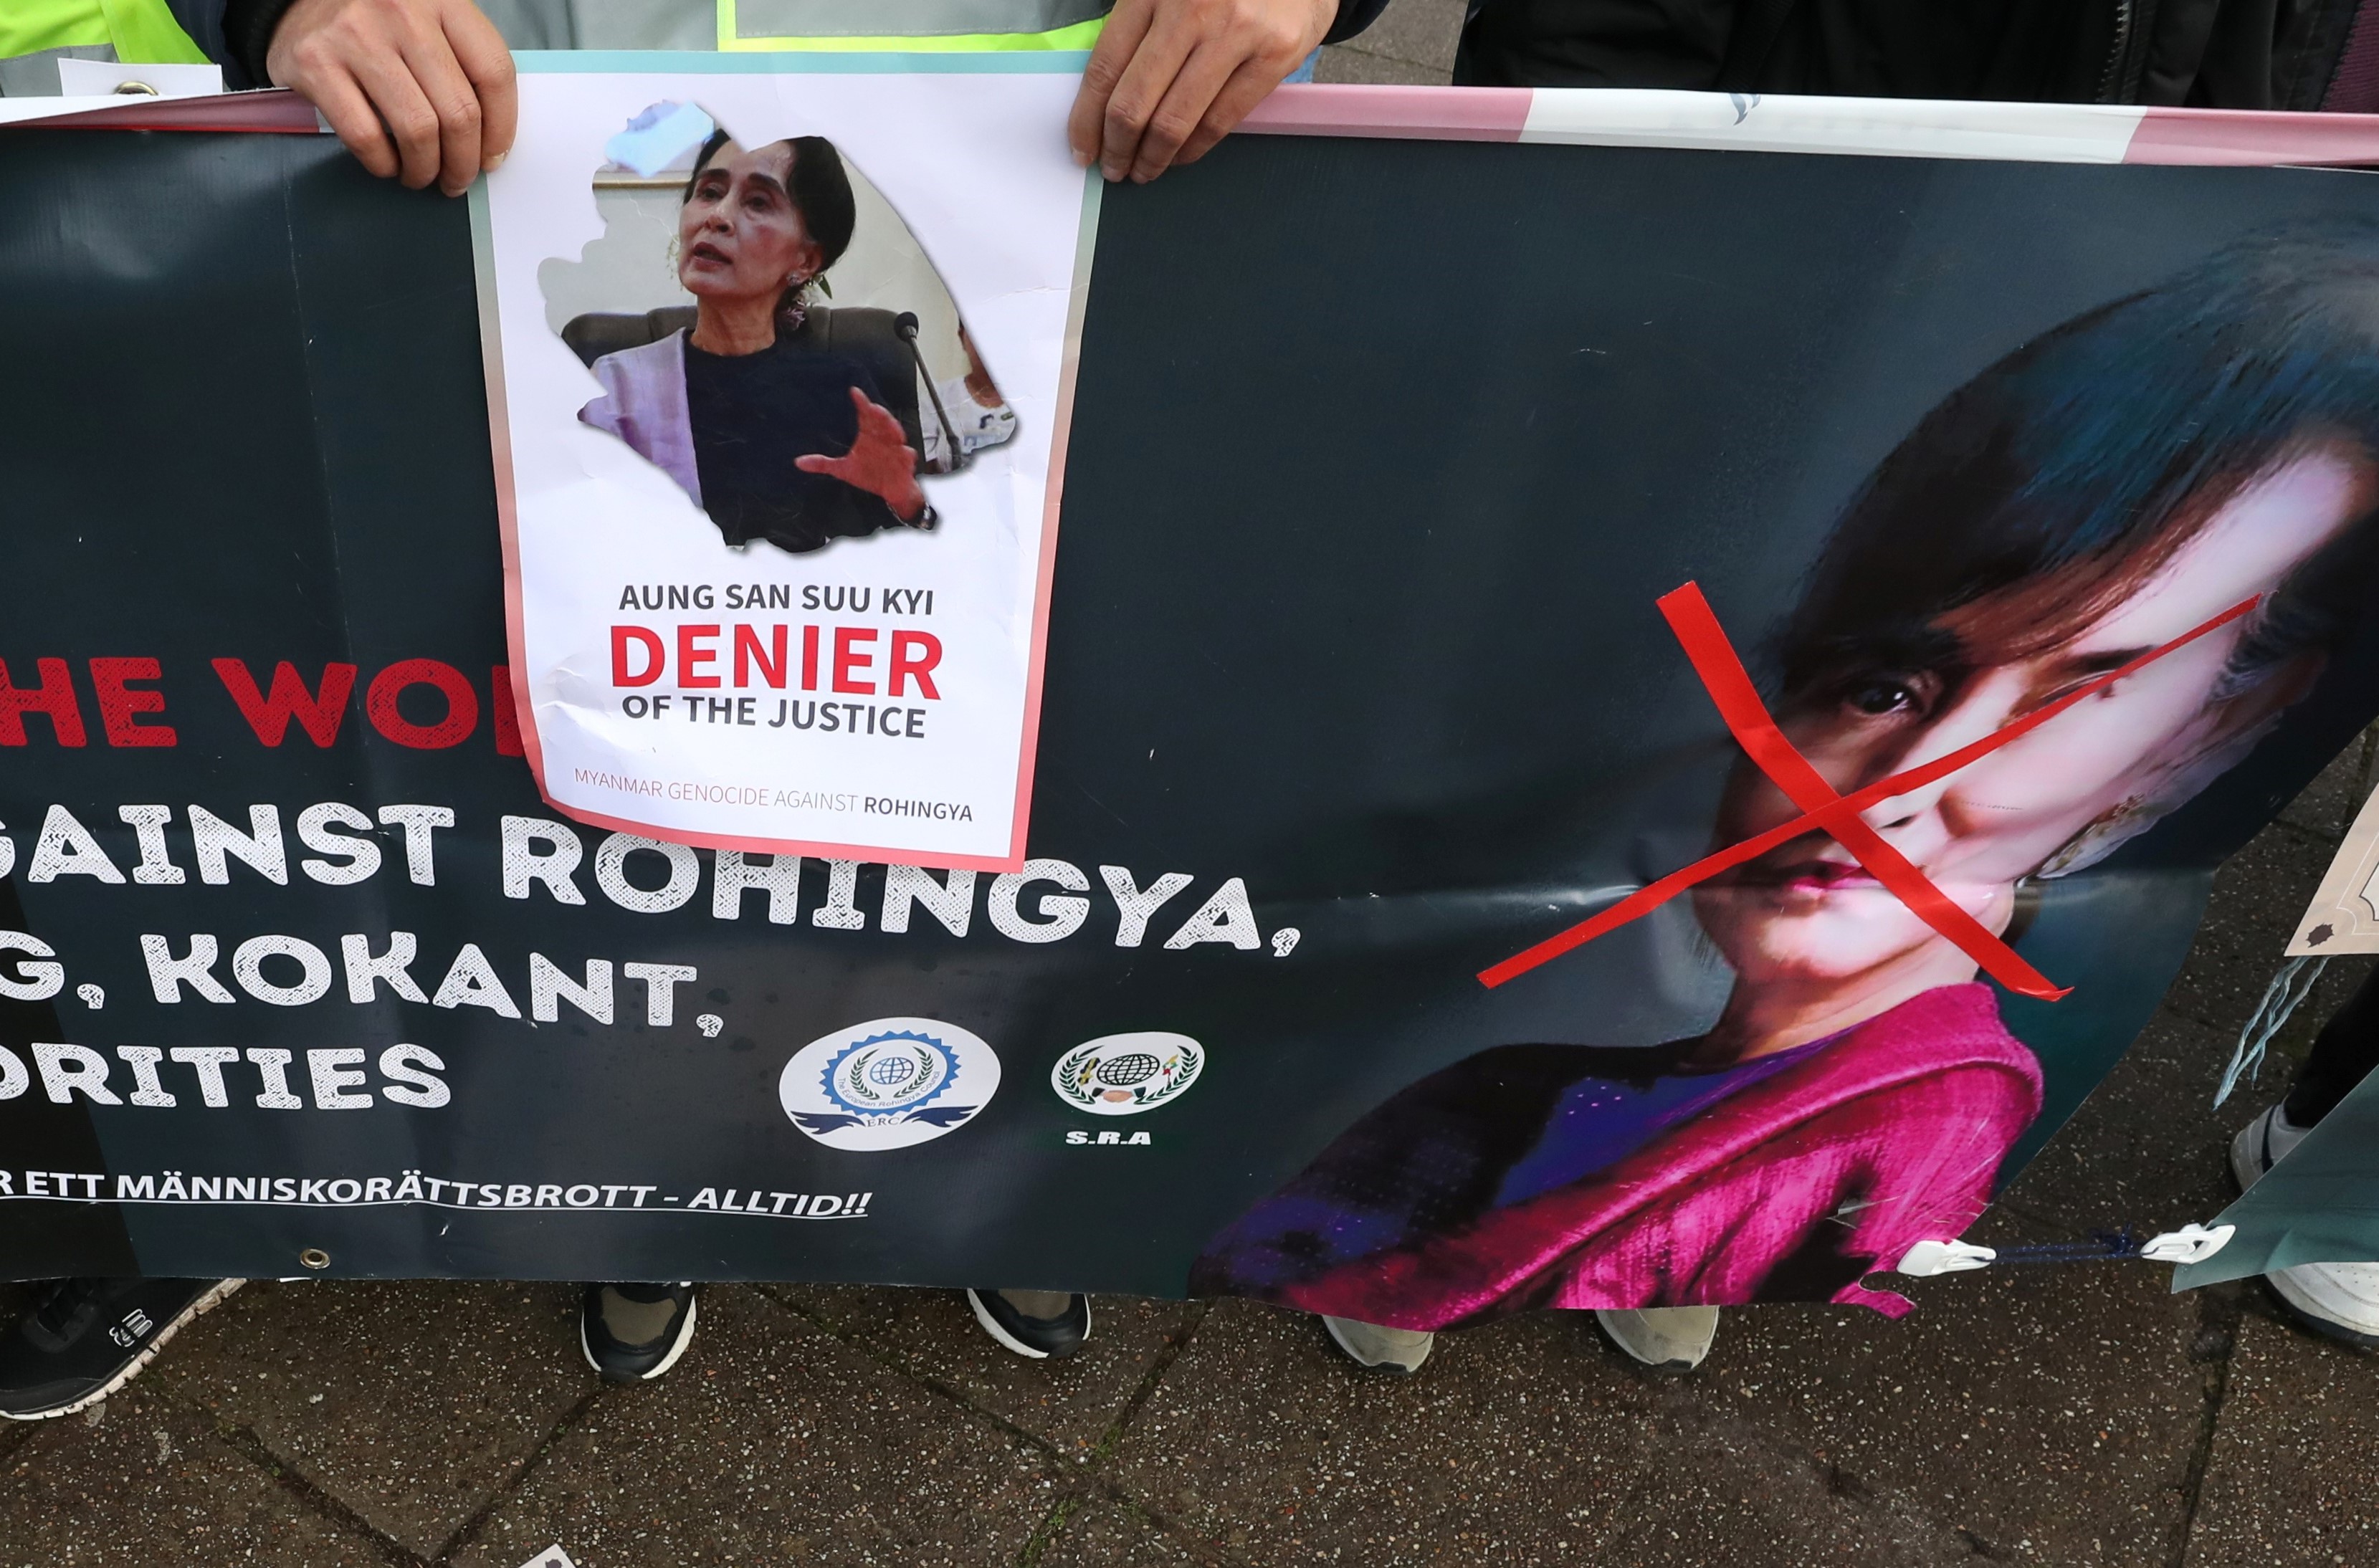 People protest against Myanmar's leader Aung San Suu Kyi on the second day of hearings in a case filed by Gambia against Myanmar alleging genocide against the minority Muslim Rohingya population, outside the International Court of Justice (ICJ) in The Hague, Netherlands December 11, 2019